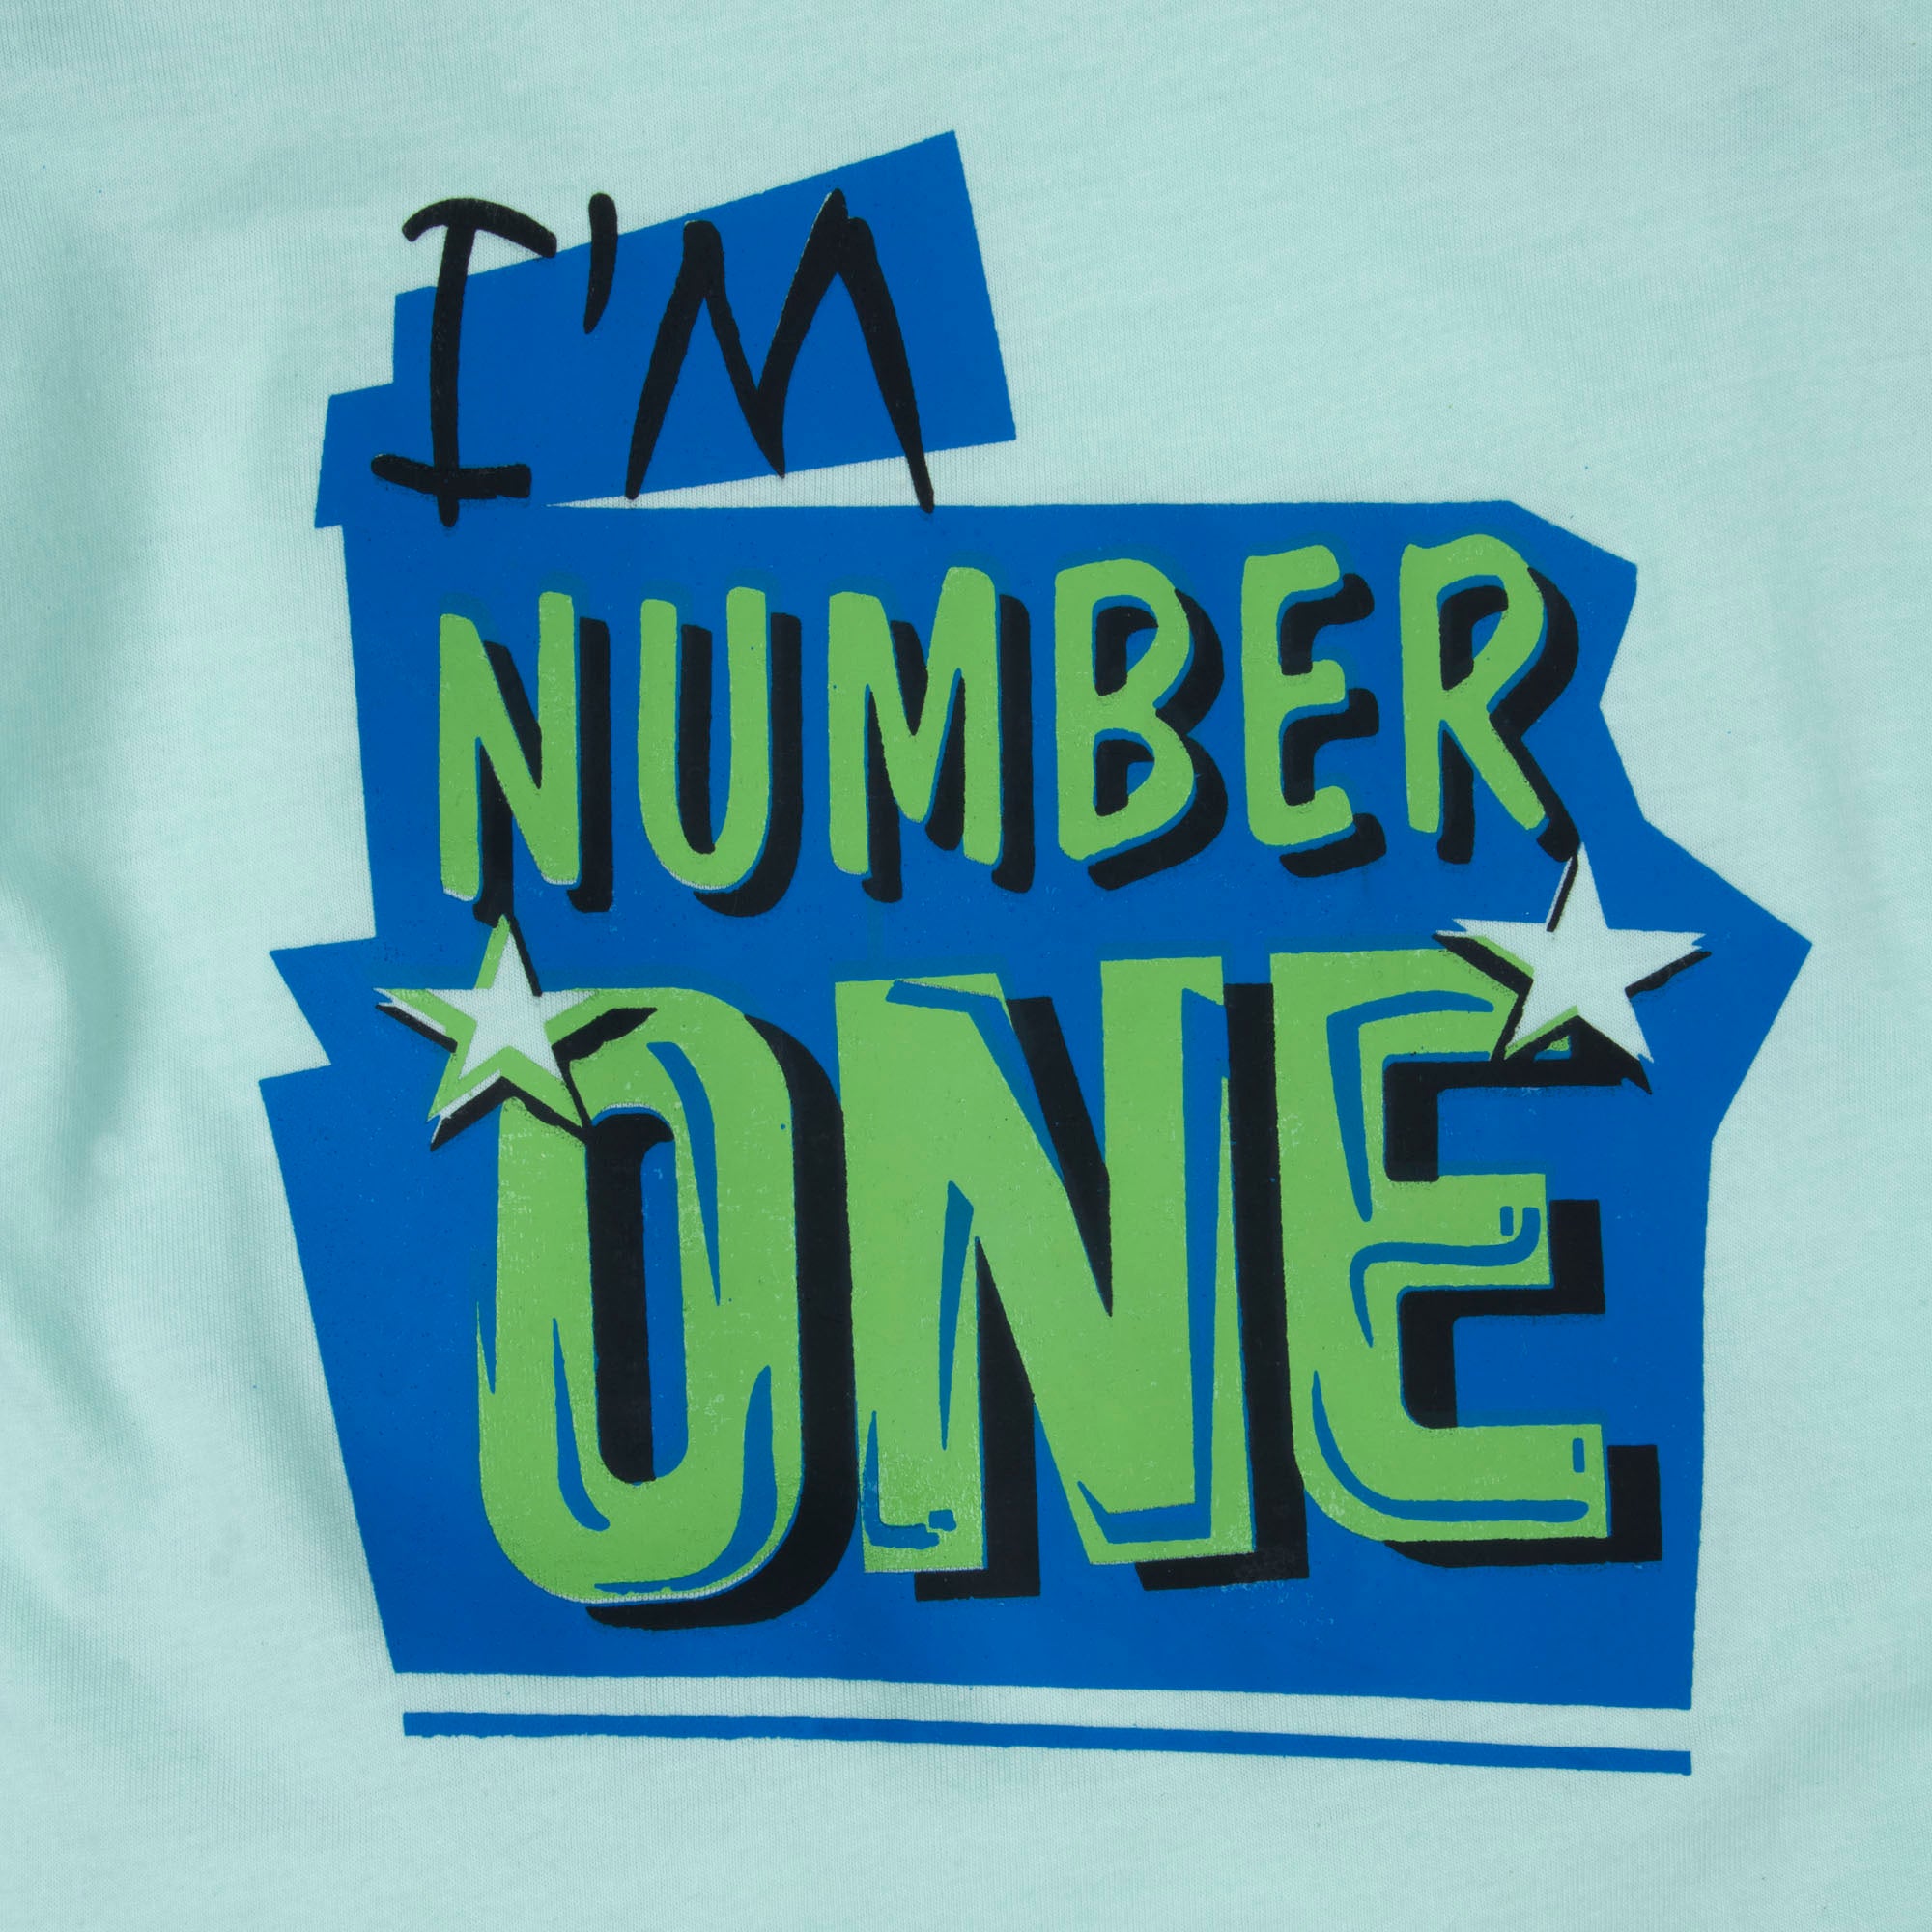 Number 1 T-shirt